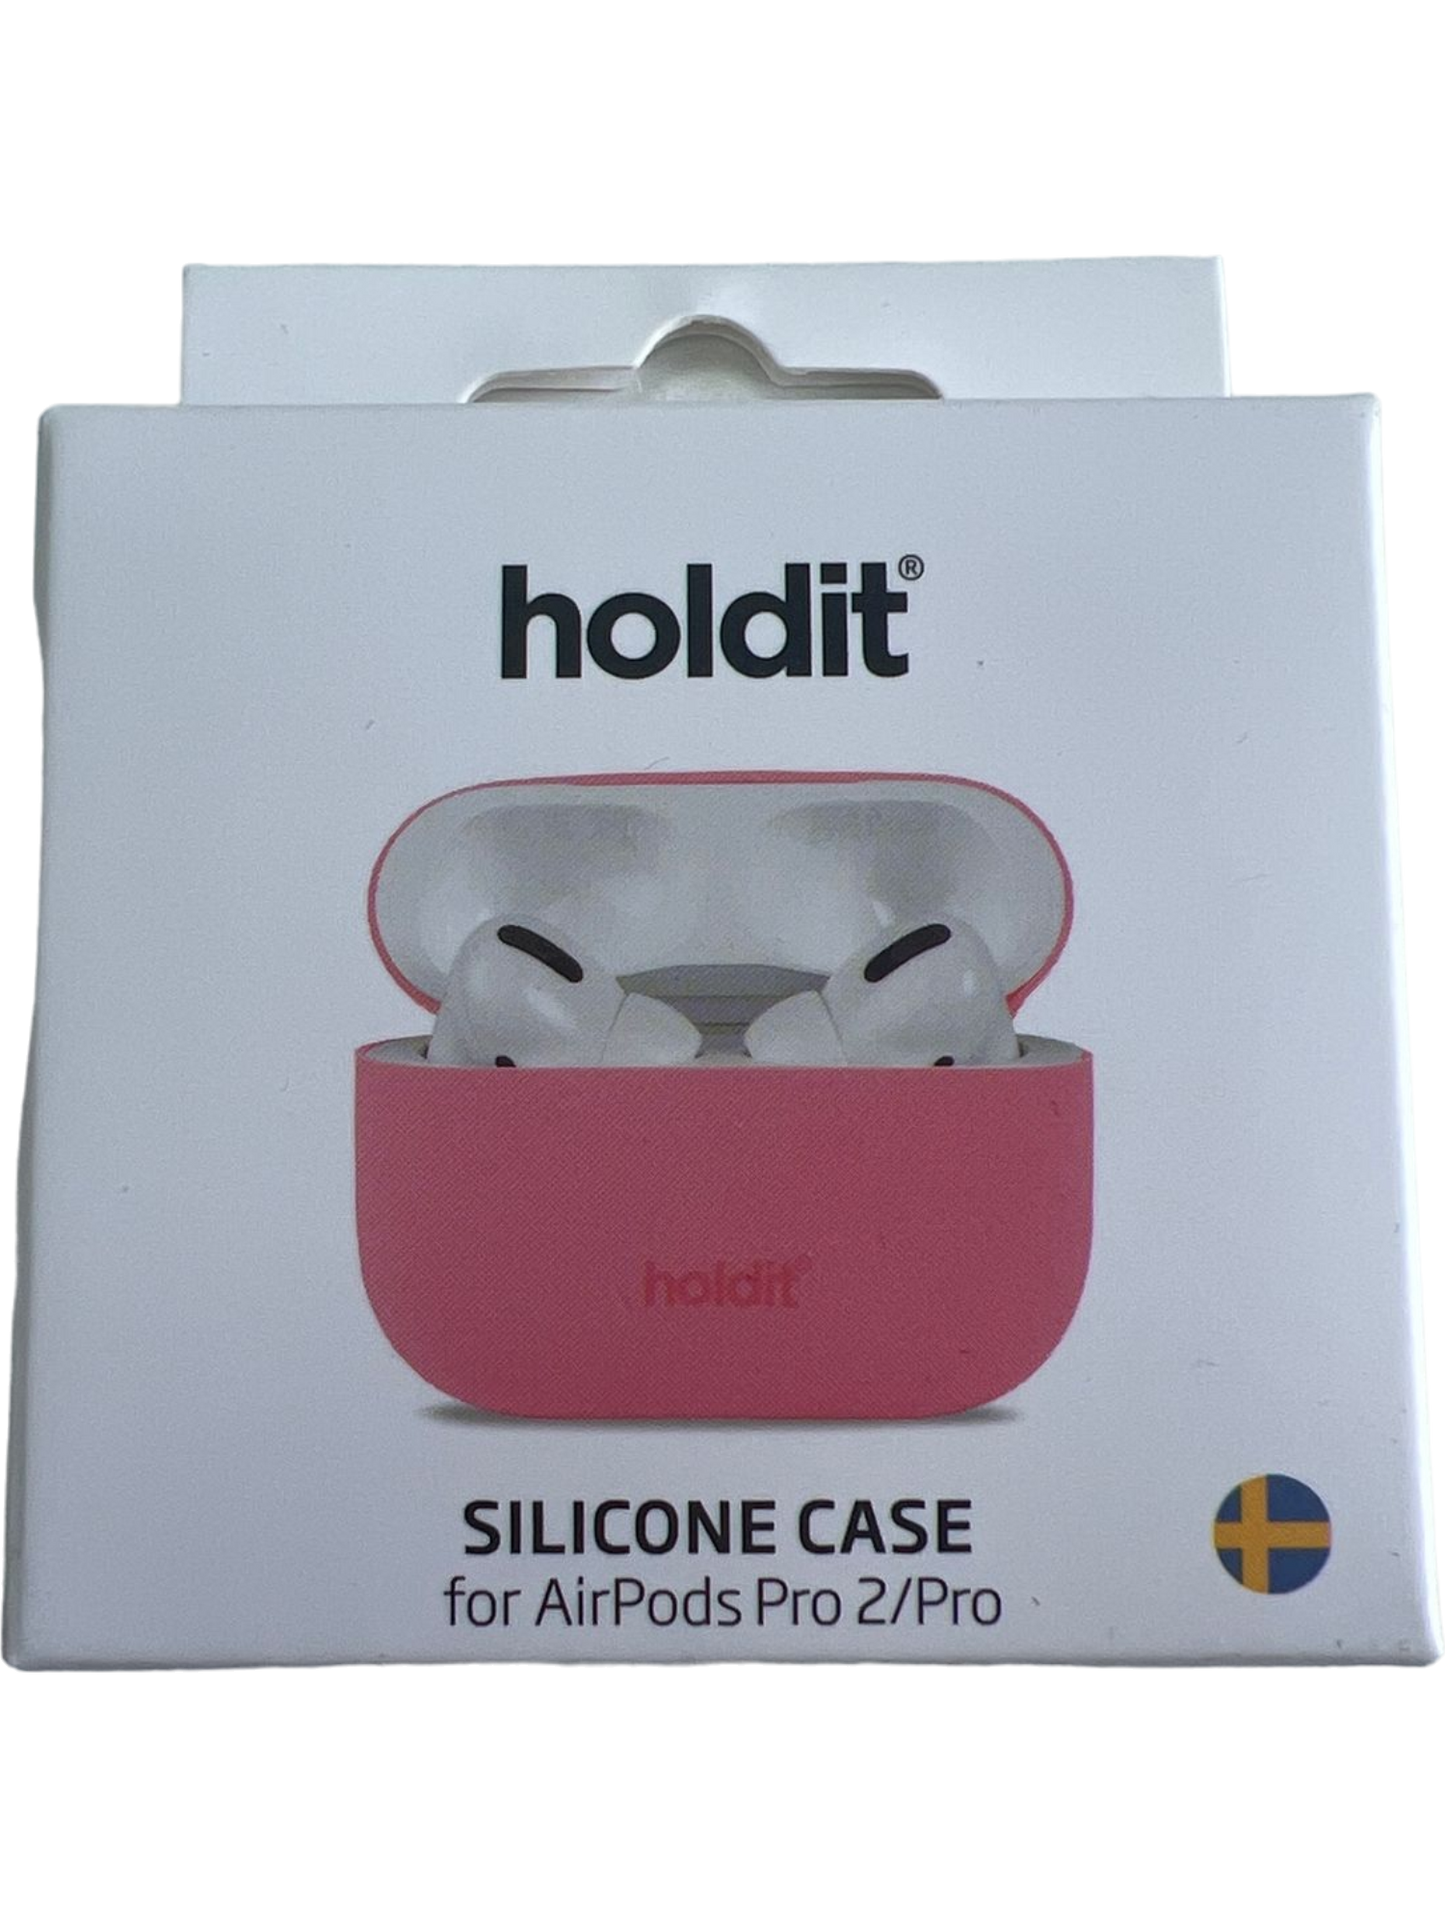 Holdit Rouge Pink Silicone Case for AirPods Pro 1&2